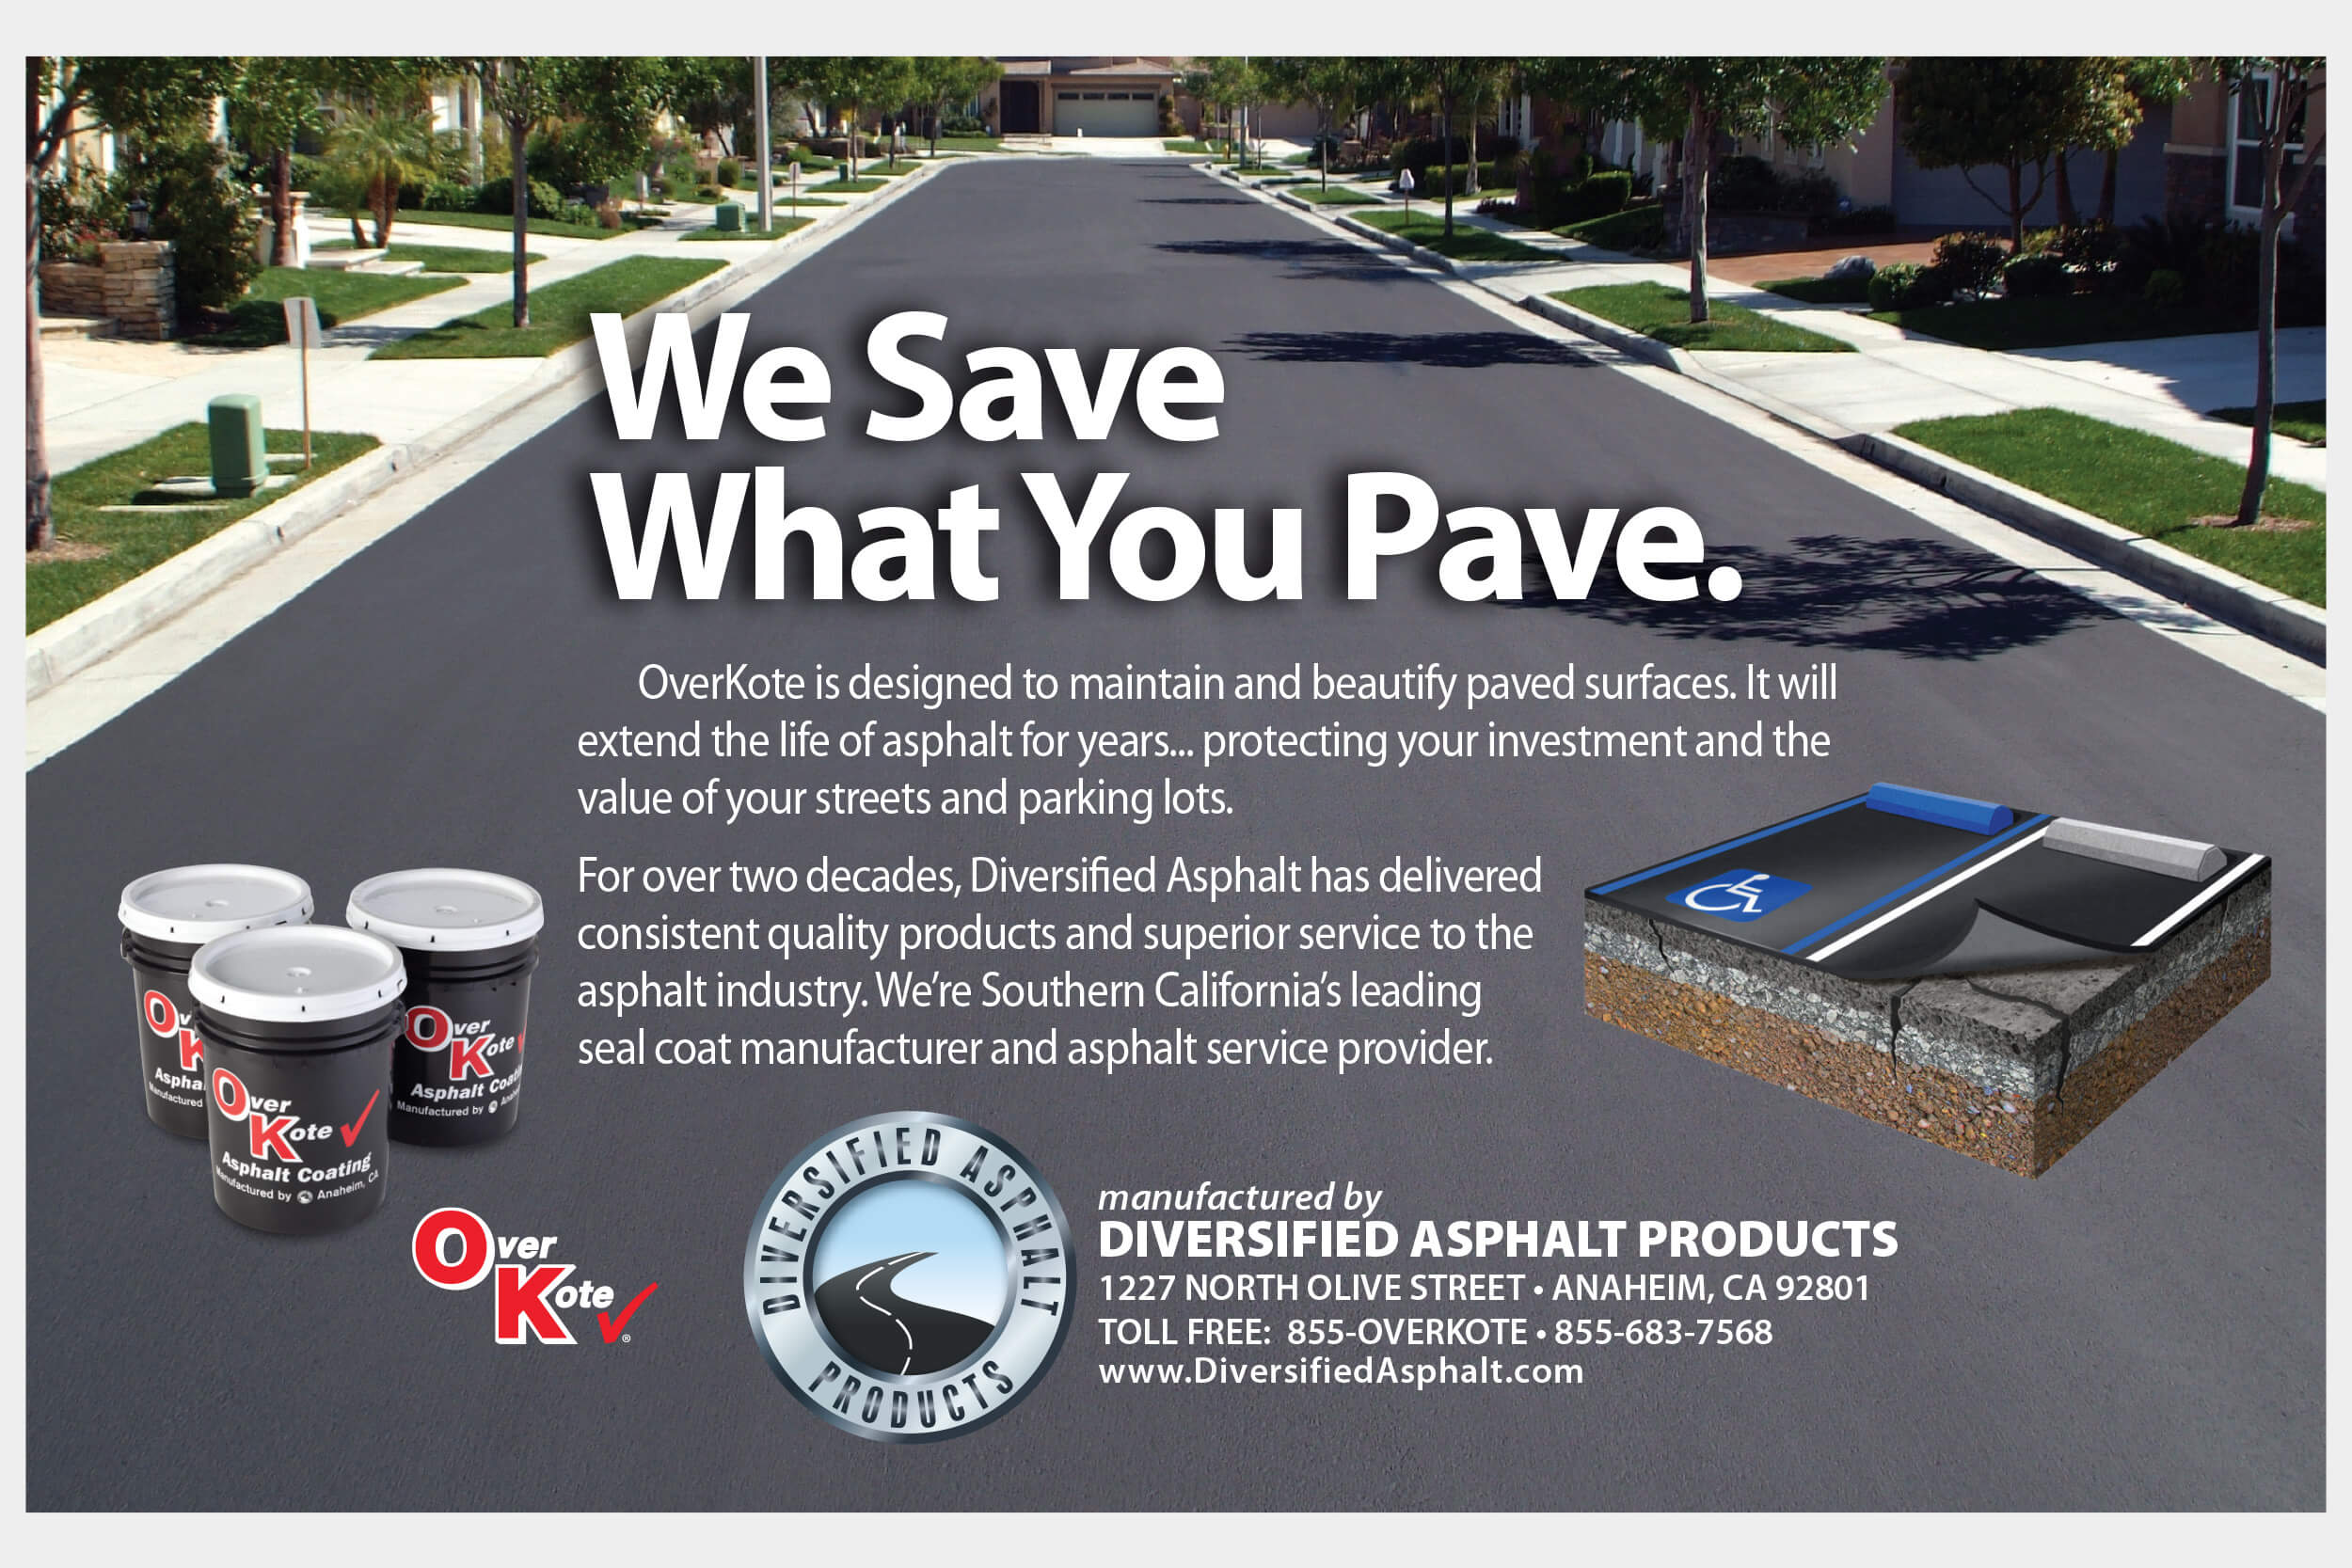 Diversified Asphalt Save What You Pave